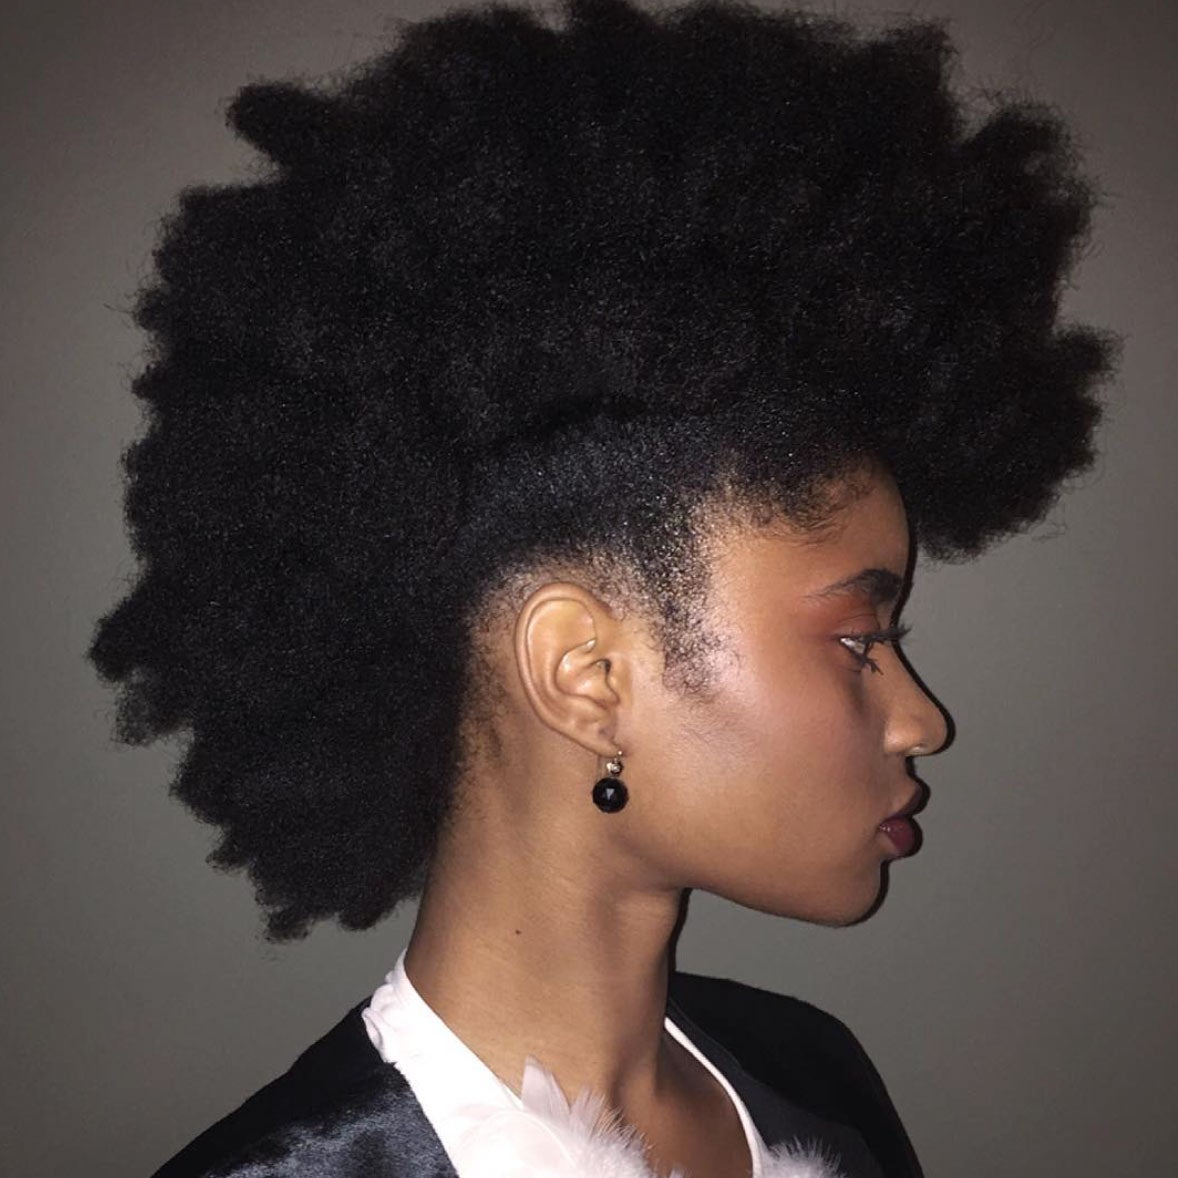 15 Beautiful 4C Blowout Hairstyles You'll Want To Try
